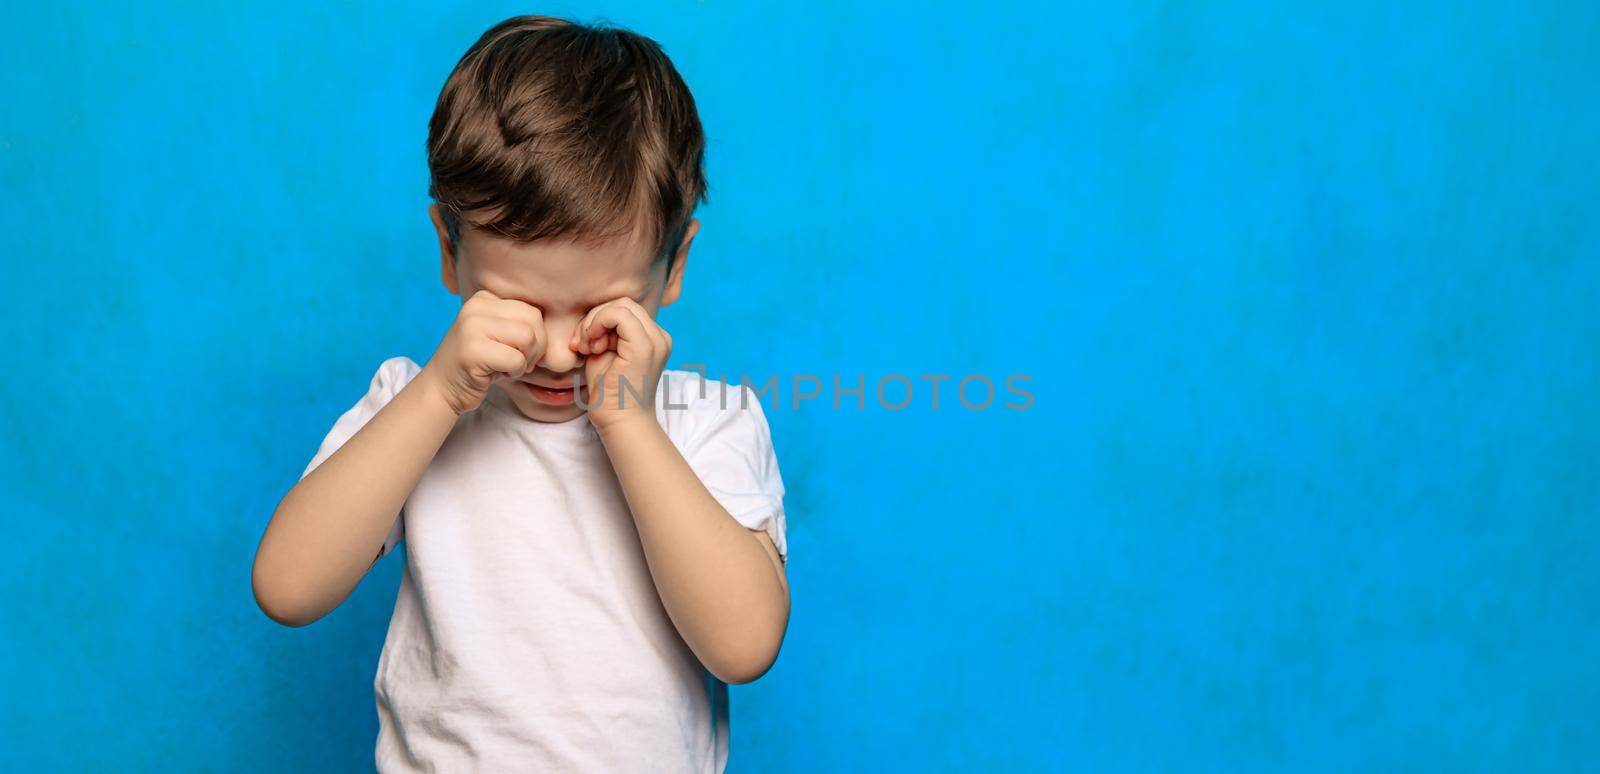 A boy on a blue background rubs his eyes . Eye health. Eye diseases. A crying baby. Fatigue of children. Psychology. Copy Space